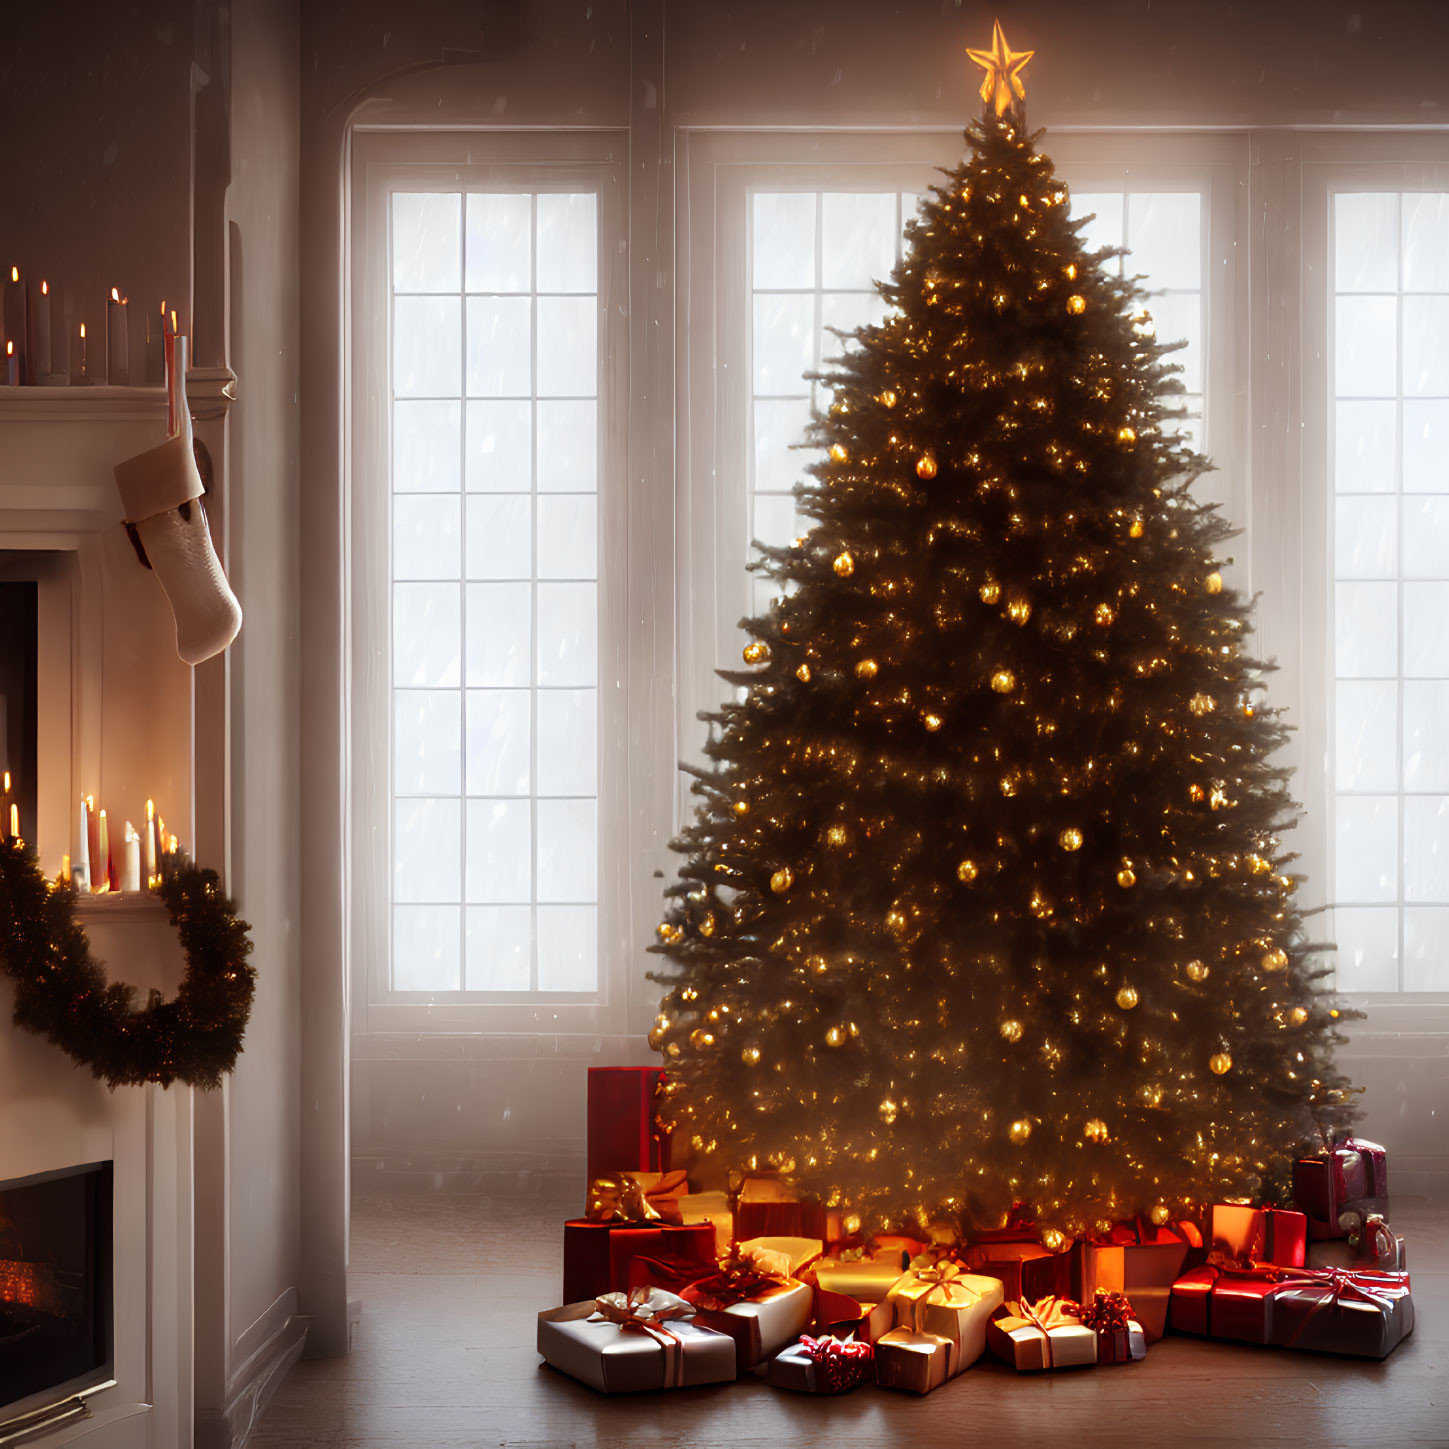 Warm Fireplace, Christmas Tree, Gifts, and Snowy View in Cozy Room